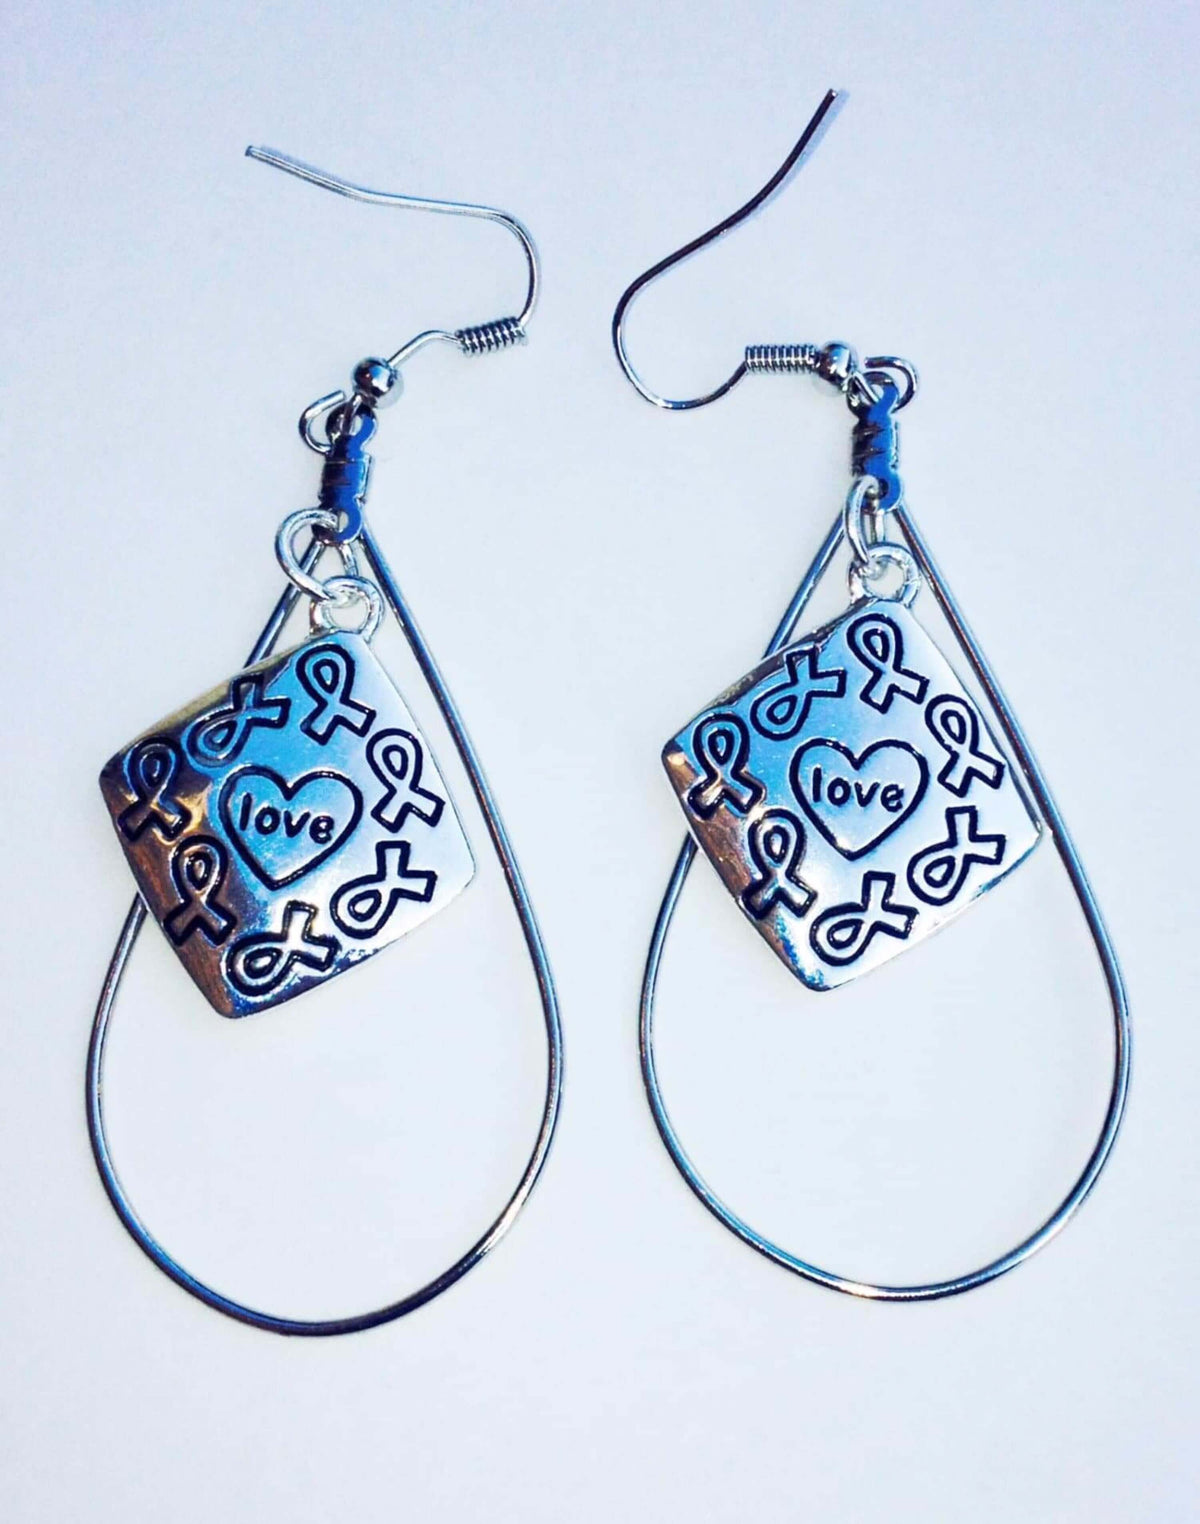 All Causes Awareness Love Charm Earrings - The House of Awareness